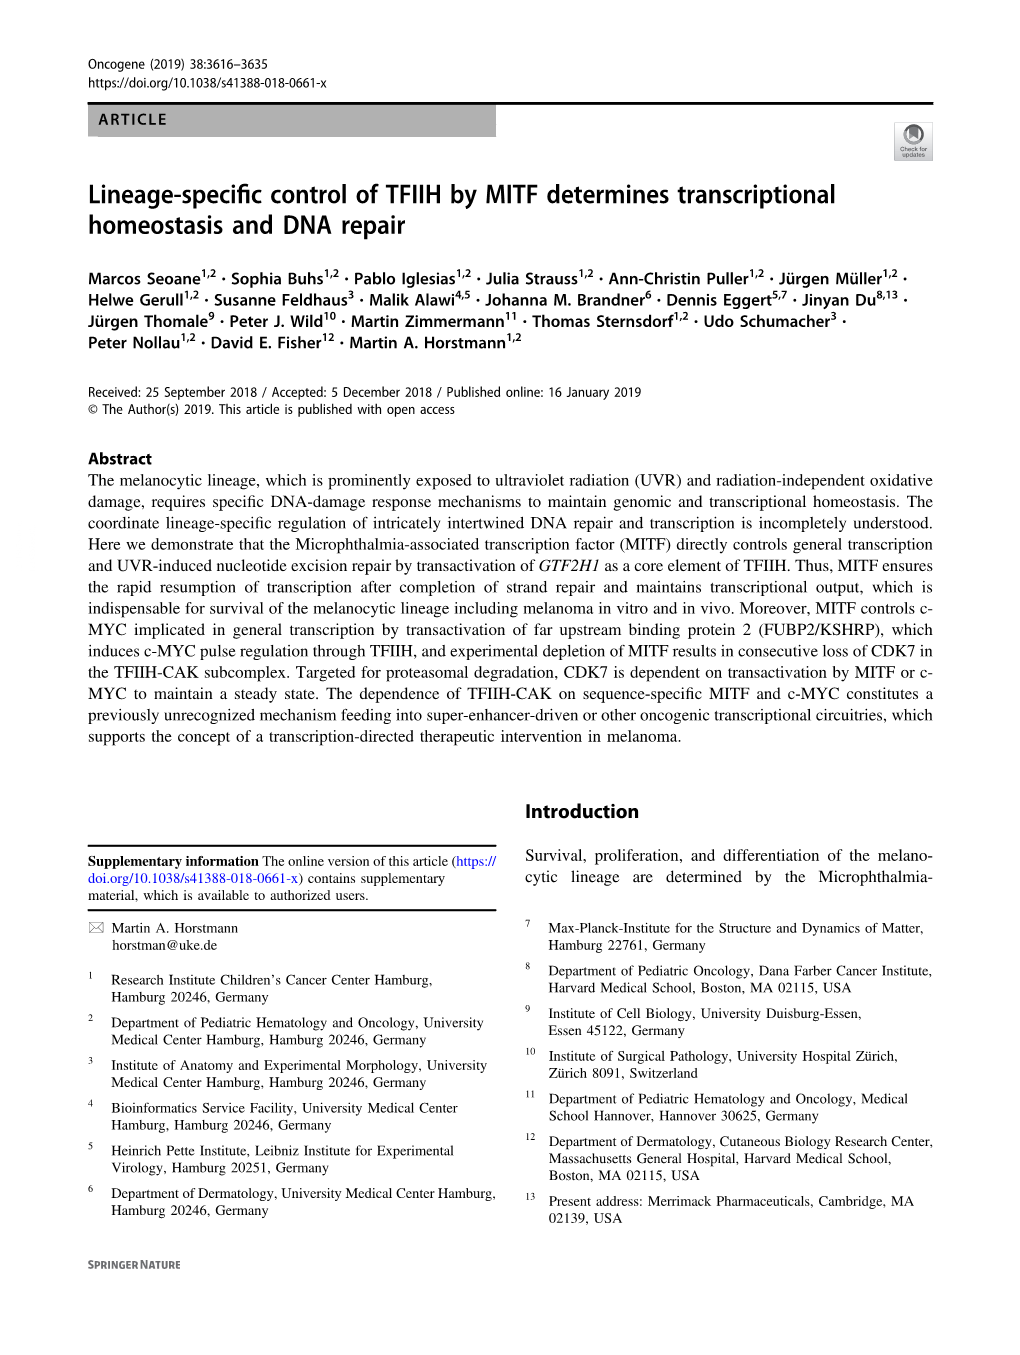 Lineage-Specific Control of TFIIH by MITF Determines Transcriptional